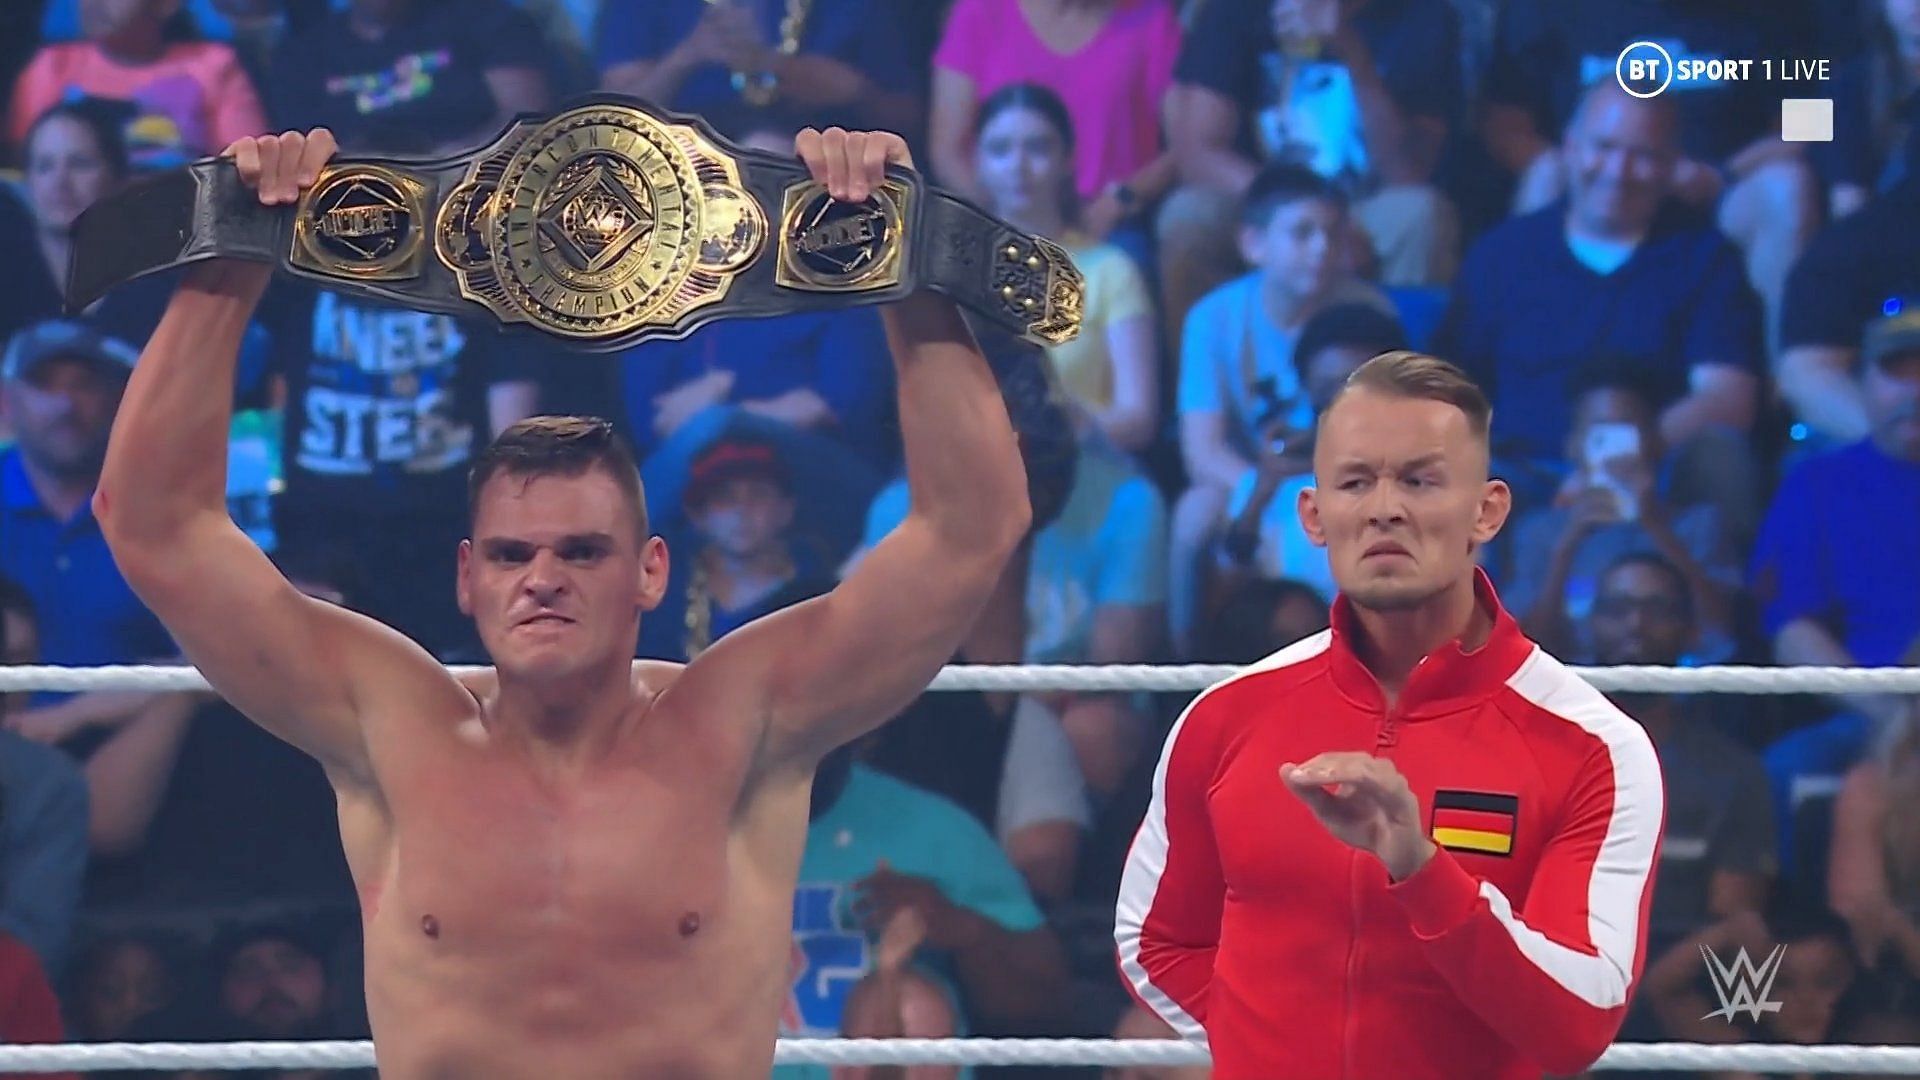 Gunther has been crowned the new Intercontinental Champion on SmackDown